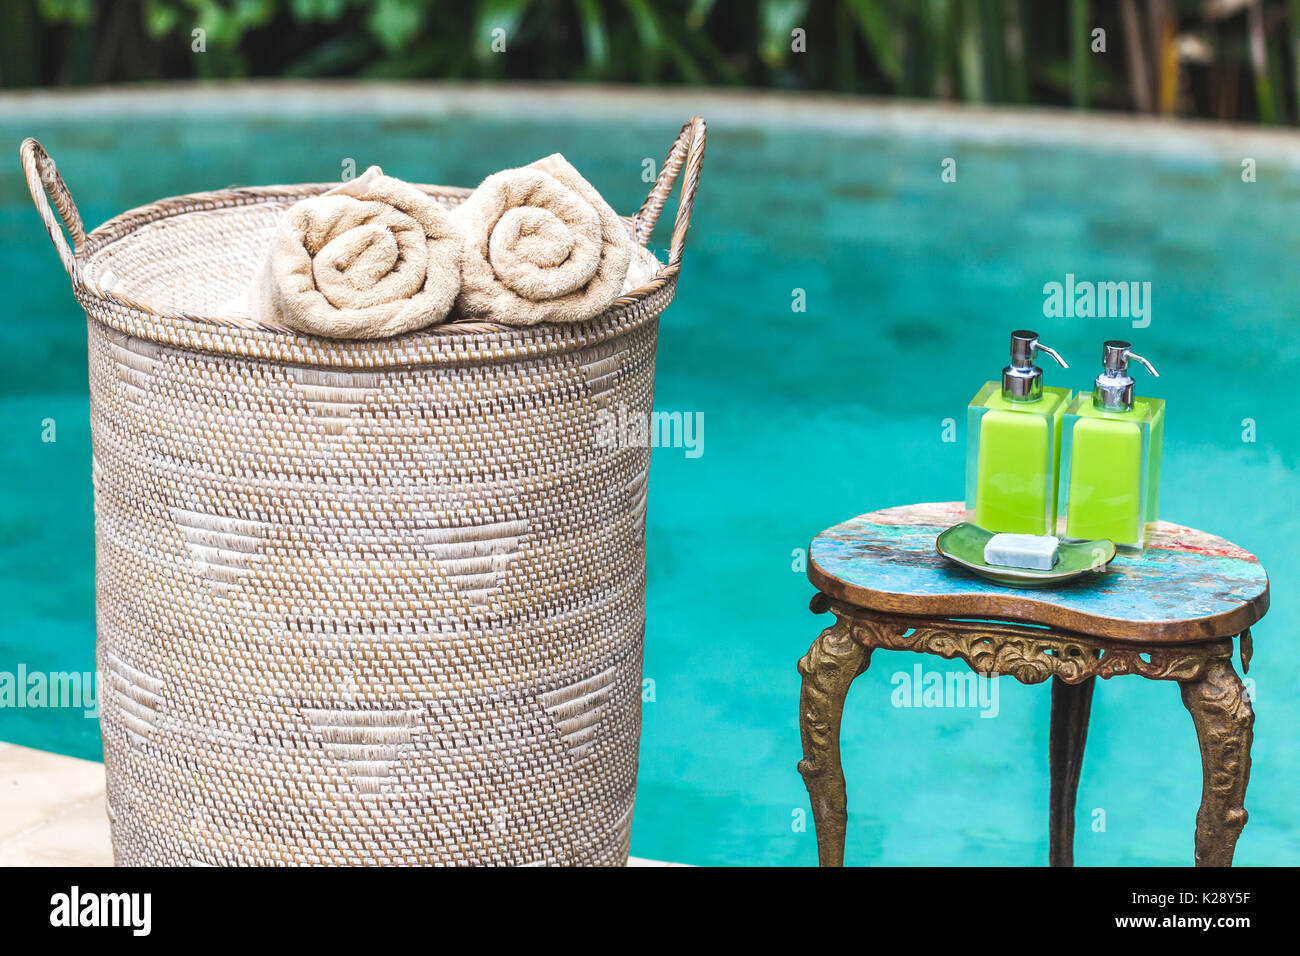 Bottle of shower gel and wicker basket with shells on sink in bathroom  Stock Photo - Alamy